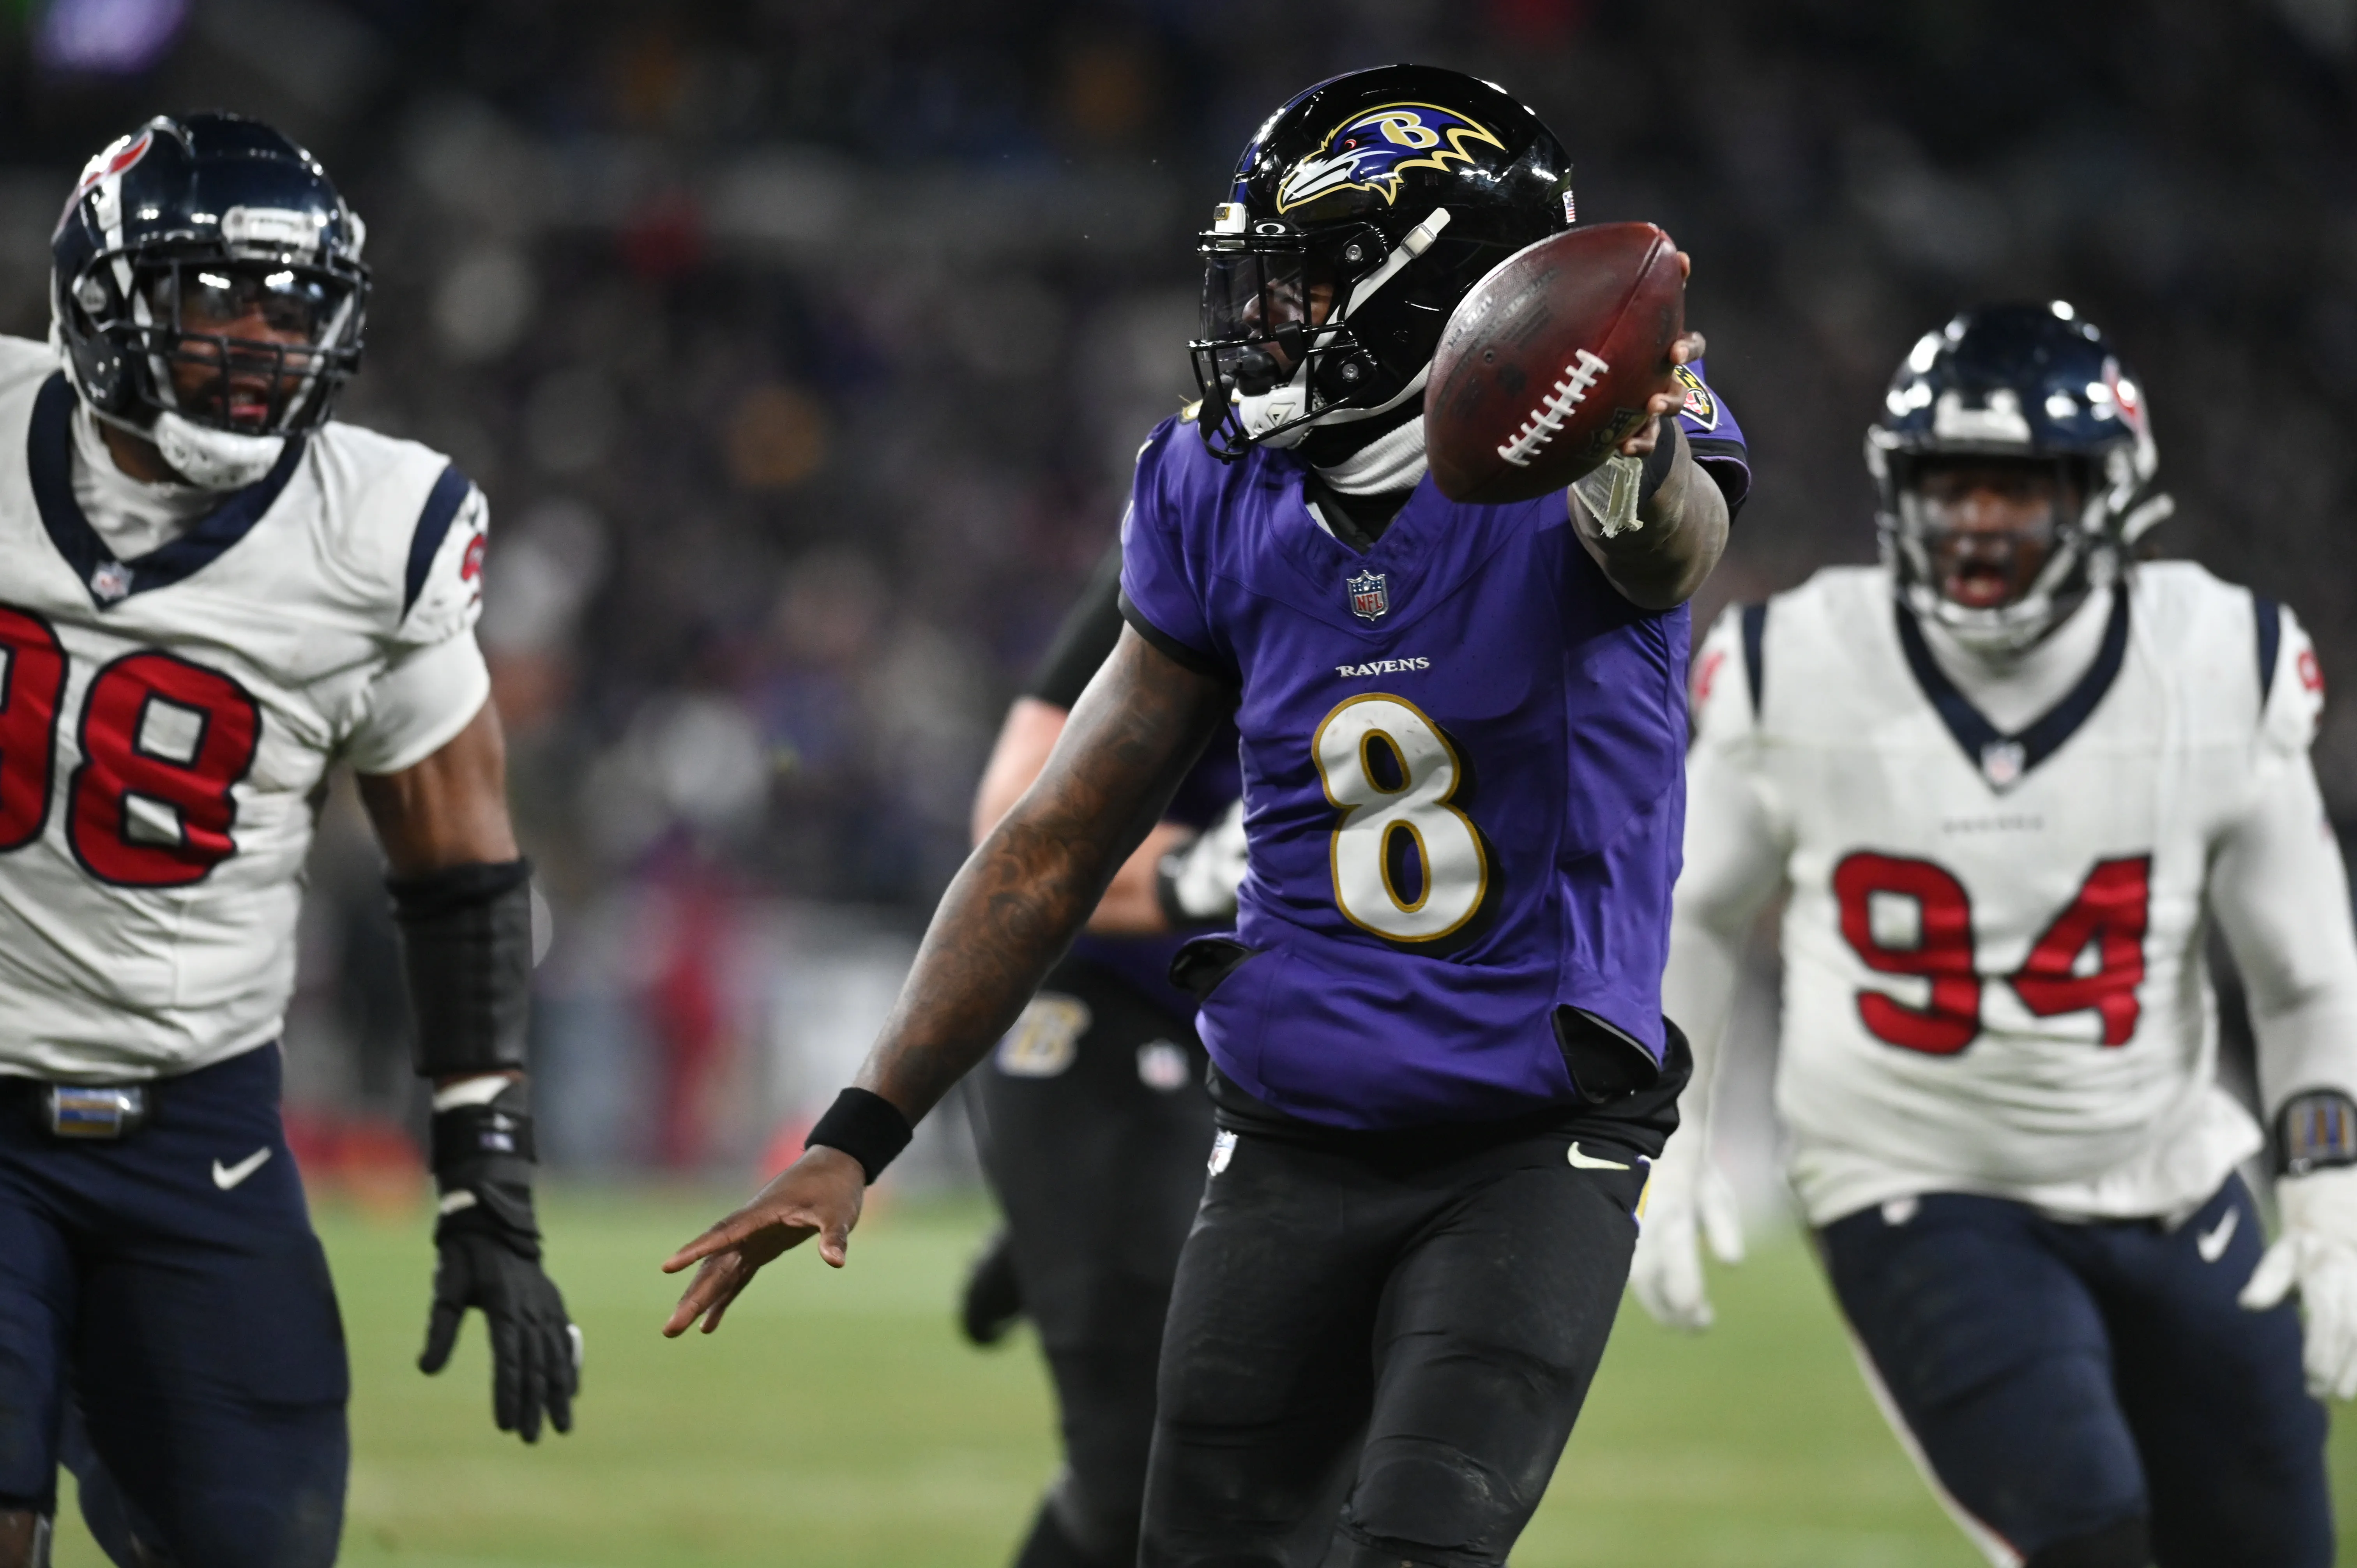 Ravens vs Texans: Baltimore's Dominant Second Half Secures 34-10 Victory